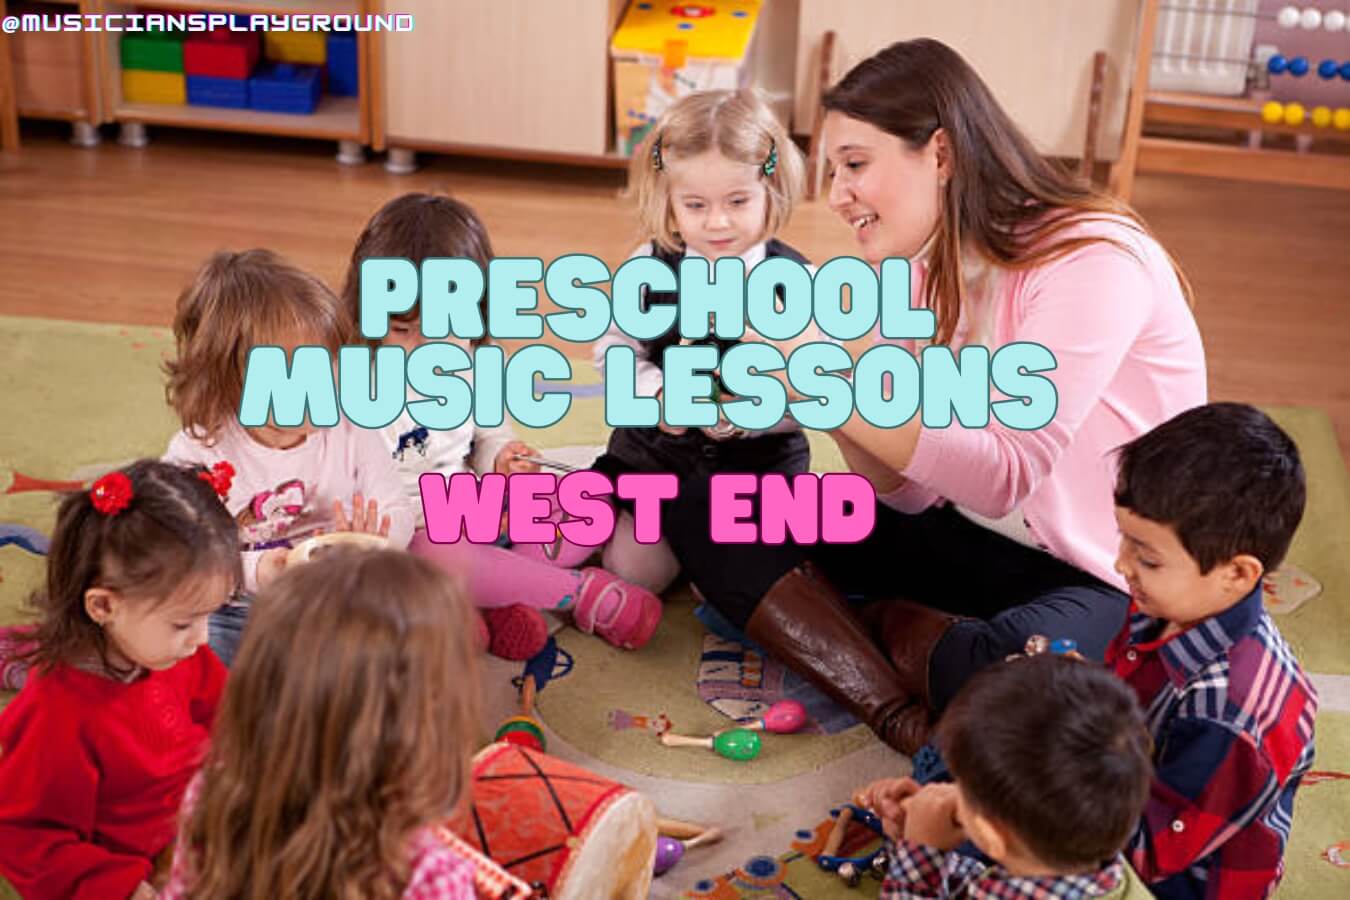 Preschool Music Lessons in West End, Massachusetts: Music Education for Young Children